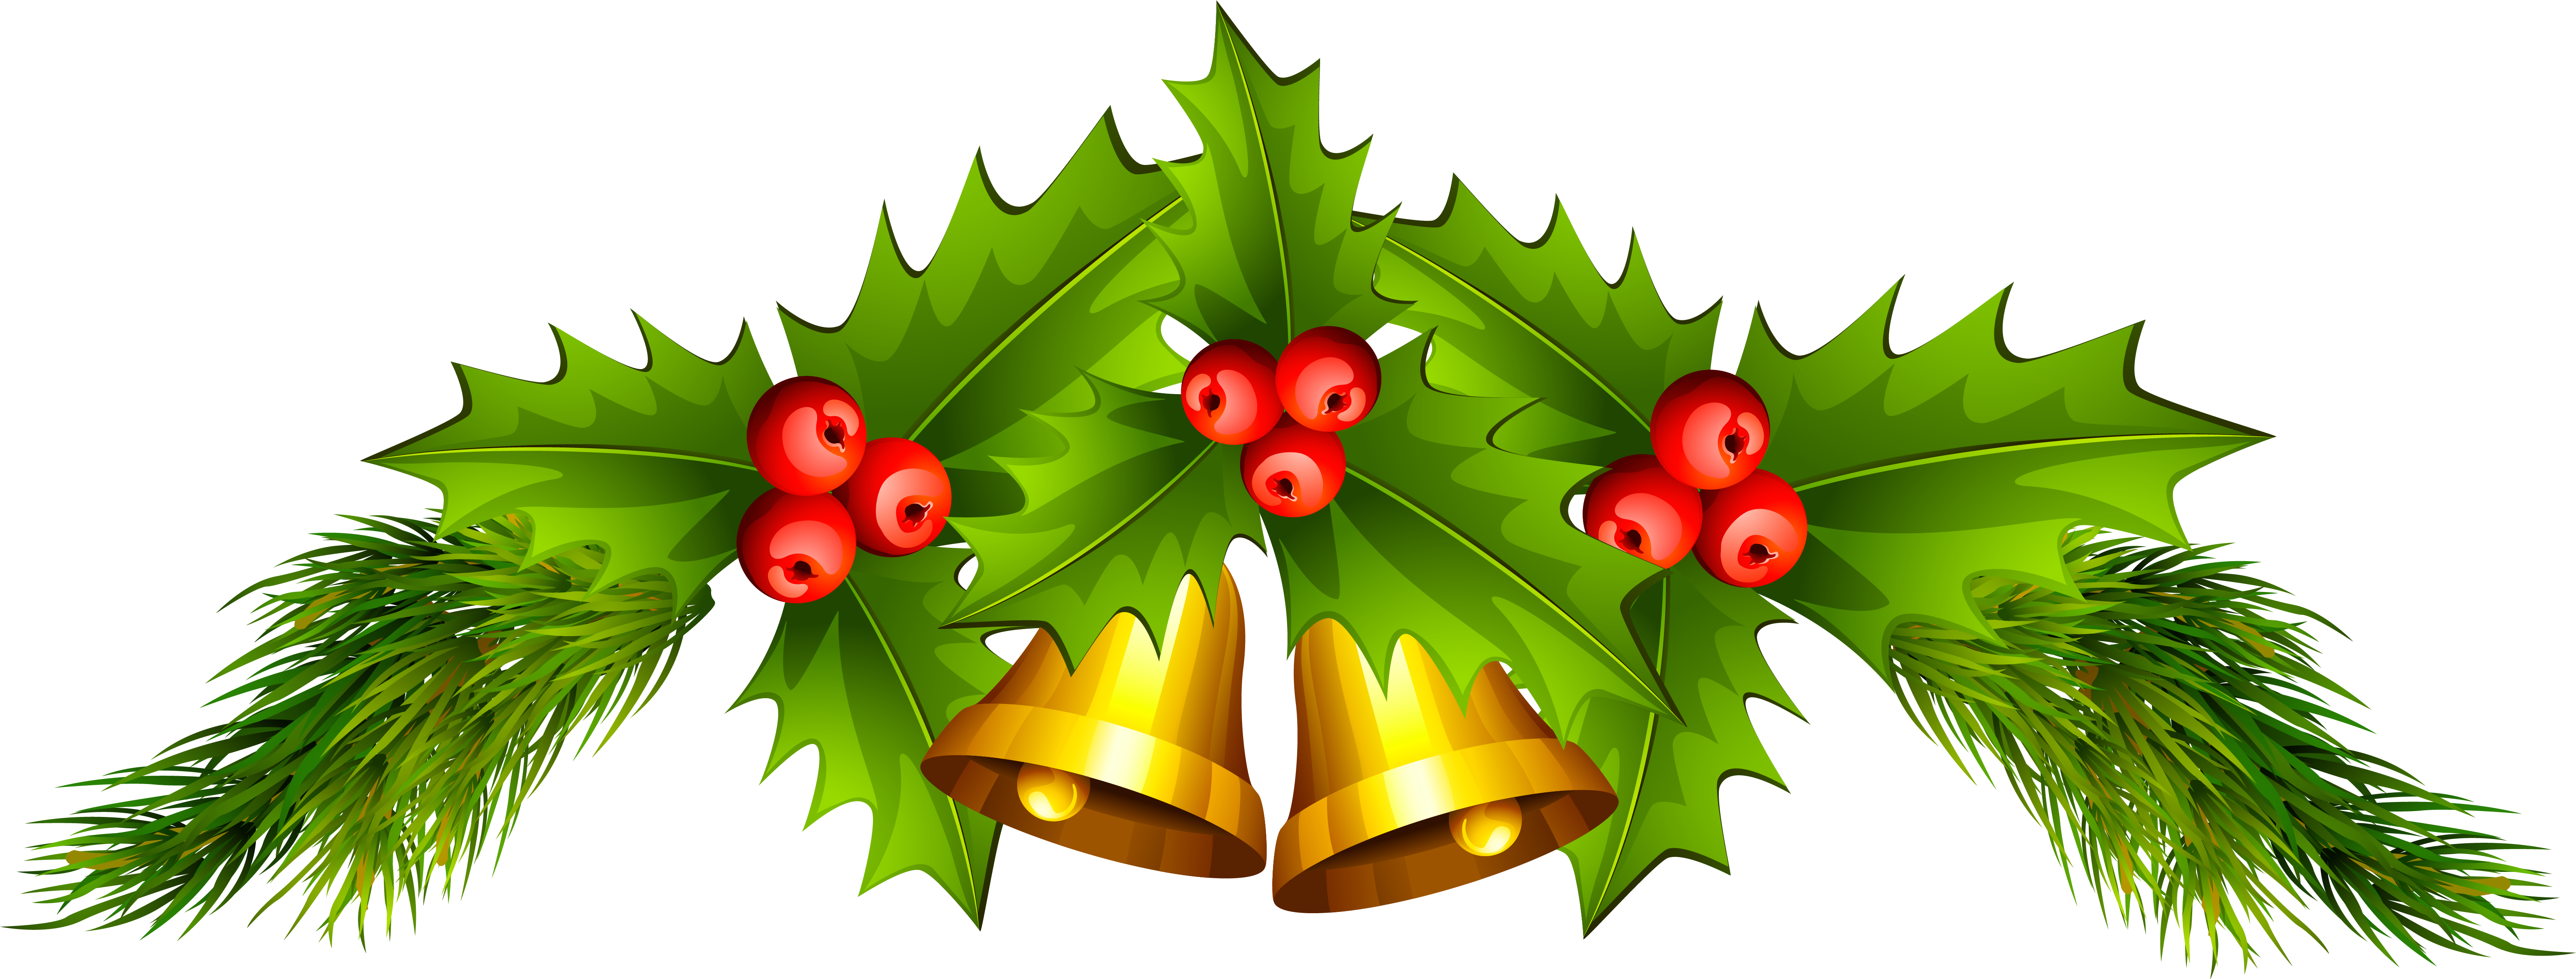 Christmas Bells Clipart At Getdrawings Christmas Bell Png